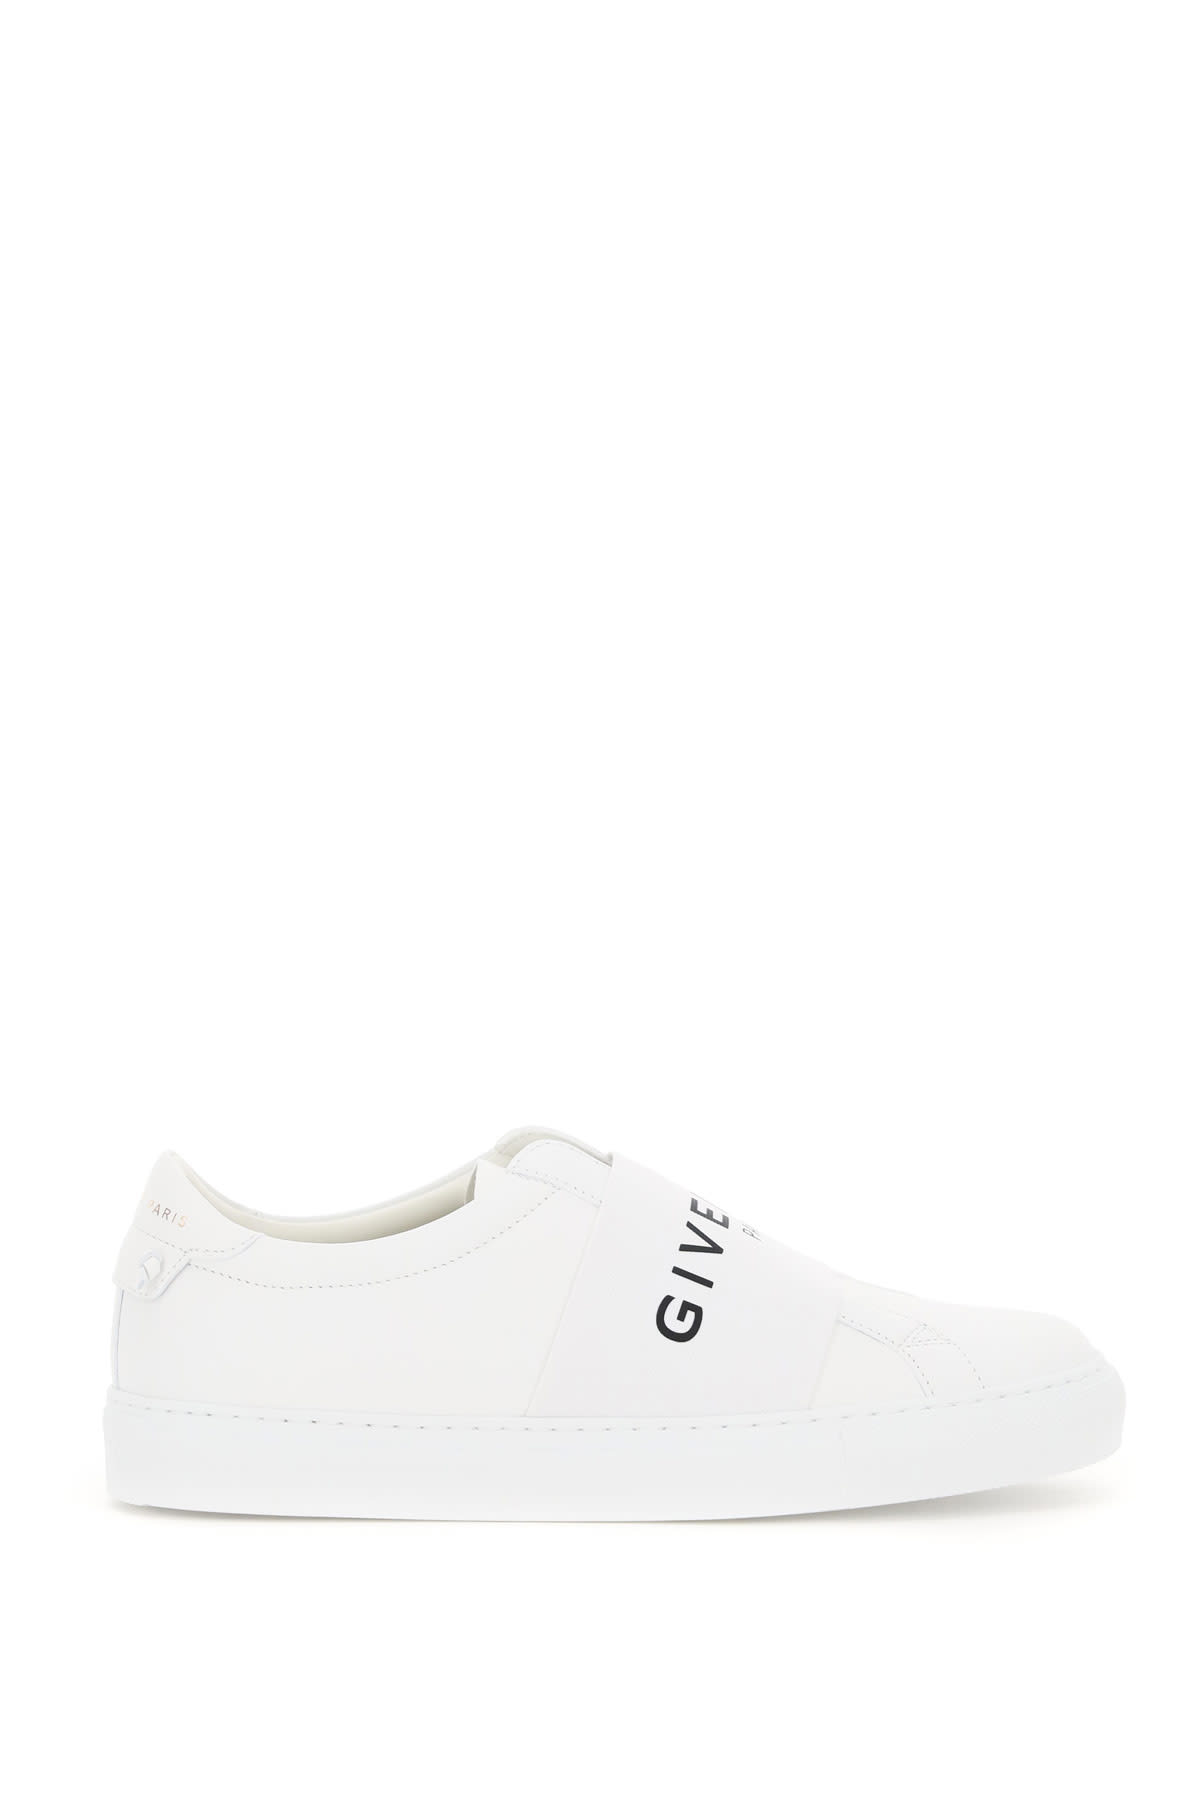 Buy Givenchy Urban Street Sneakers With Elastic Band online, shop Givenchy shoes with free shipping